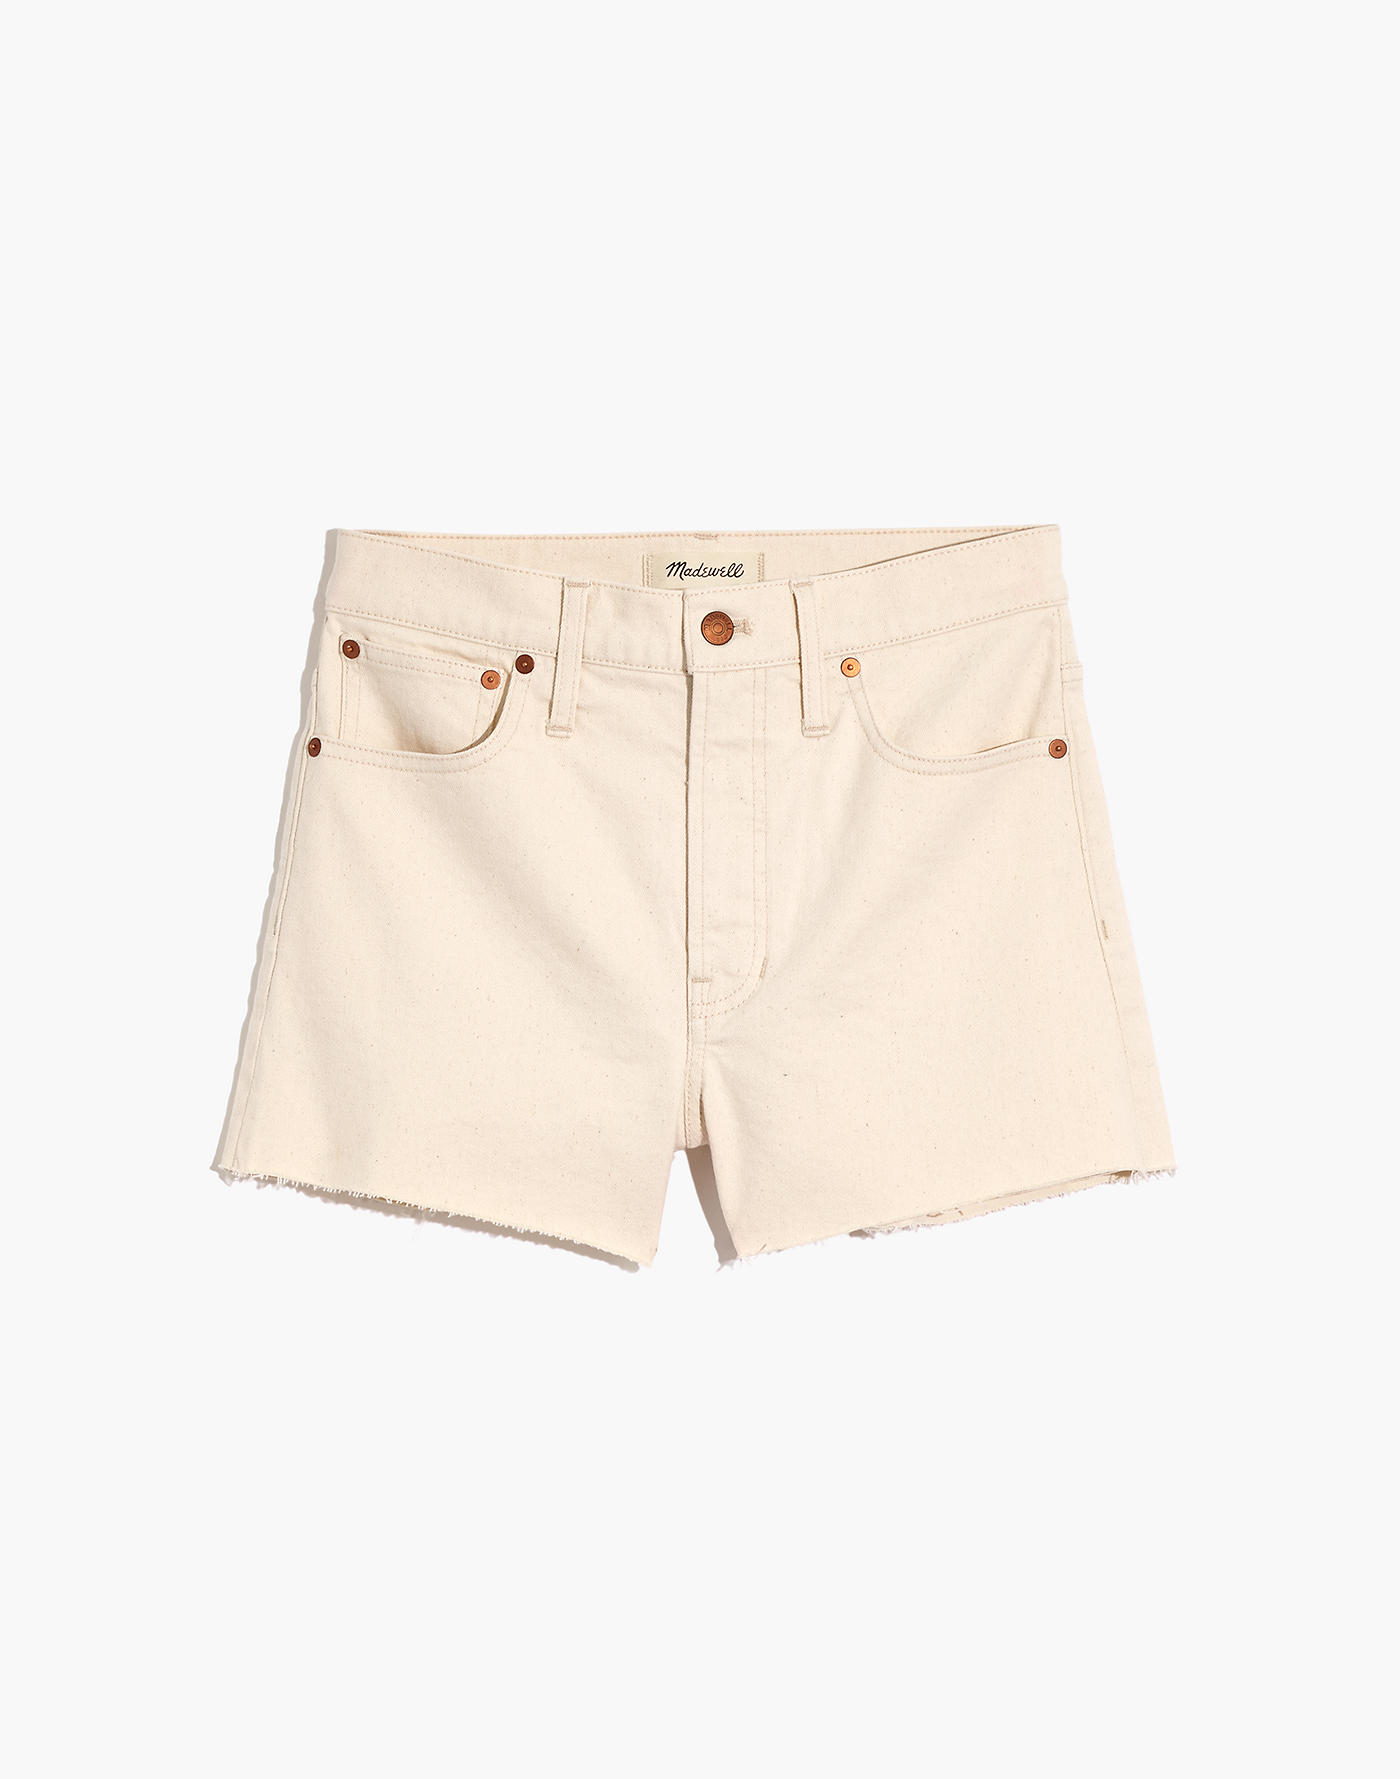 Madewell The Perfect Jean Short in Vintage Canvas Wash